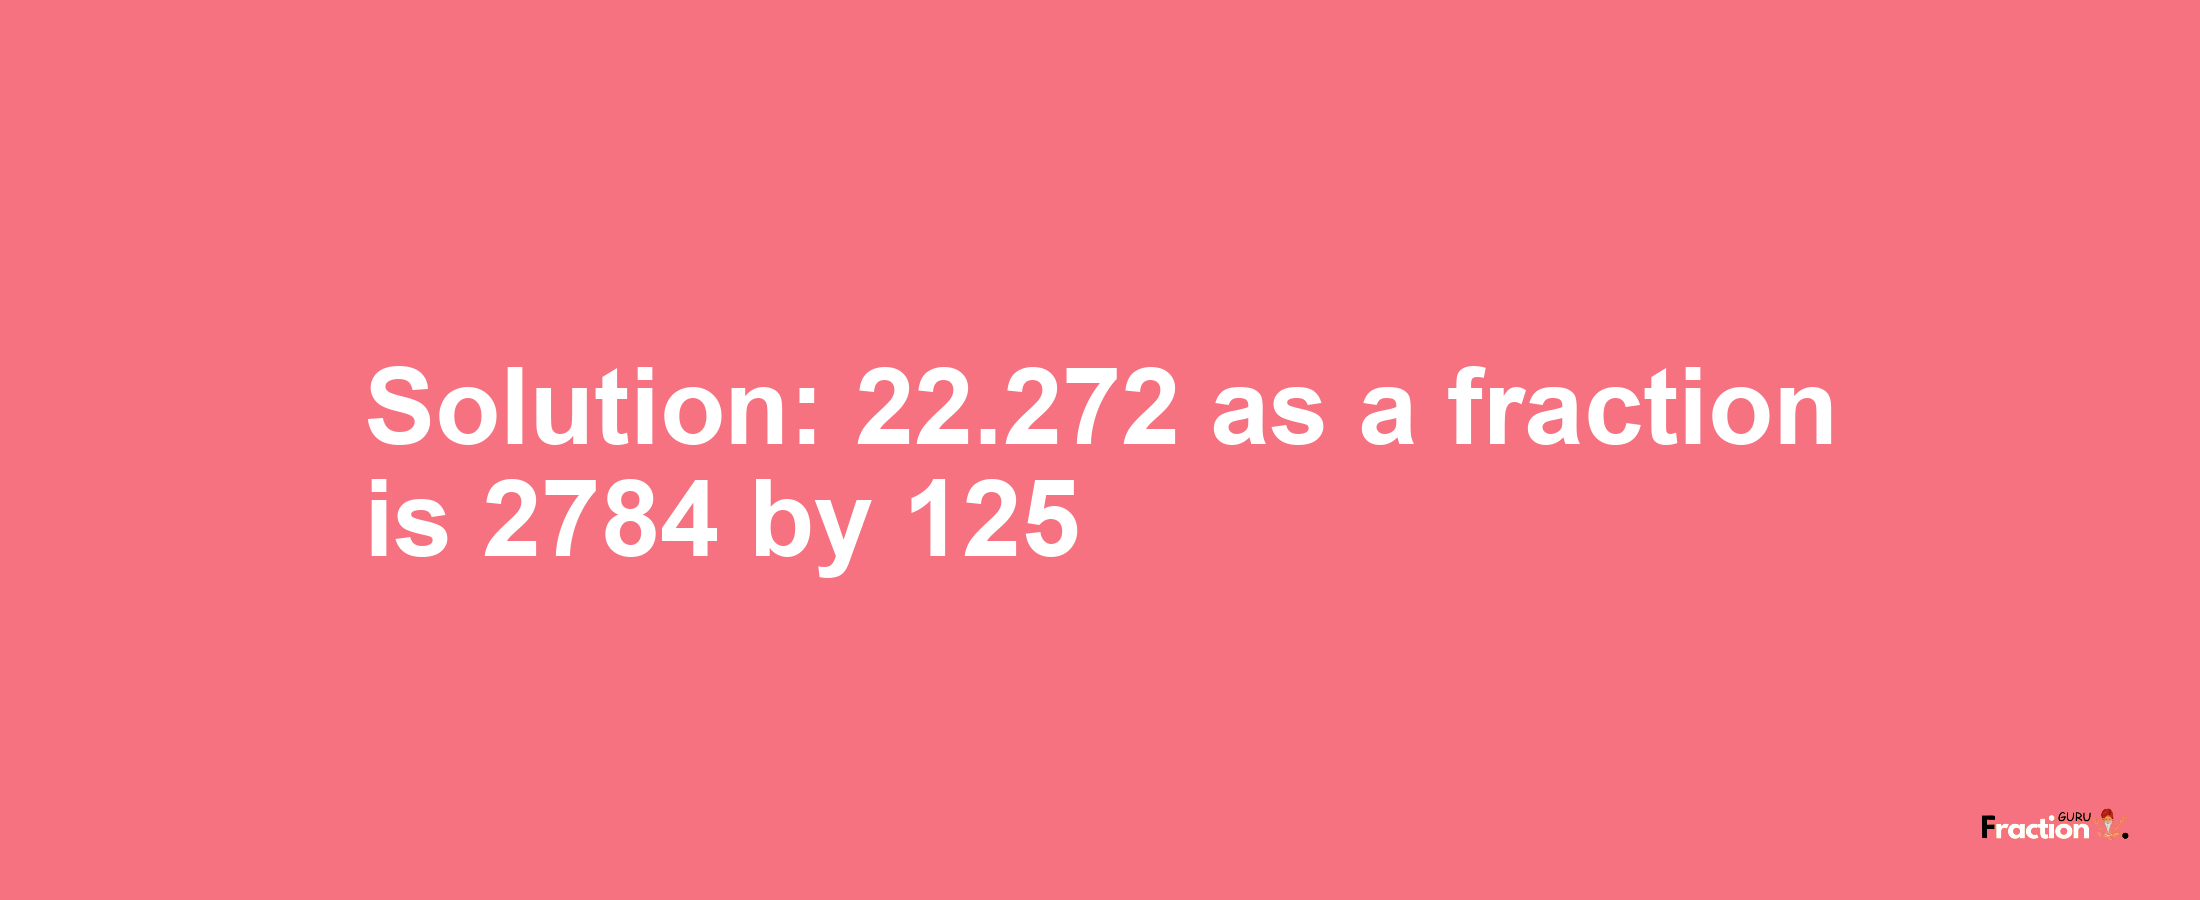 Solution:22.272 as a fraction is 2784/125